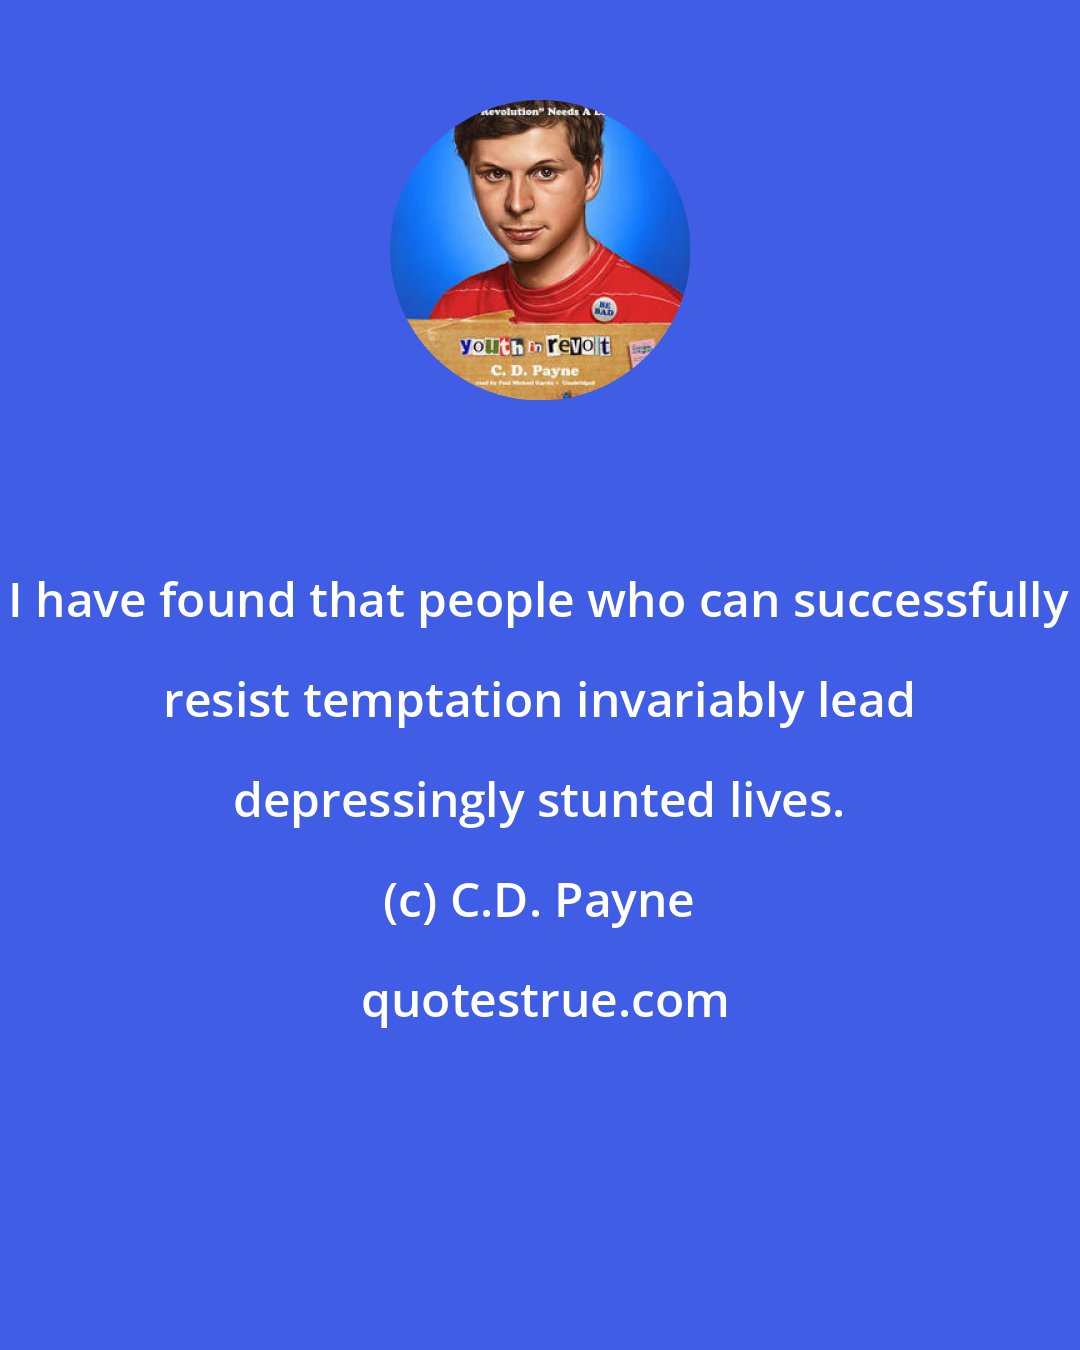 C.D. Payne: I have found that people who can successfully resist temptation invariably lead depressingly stunted lives.